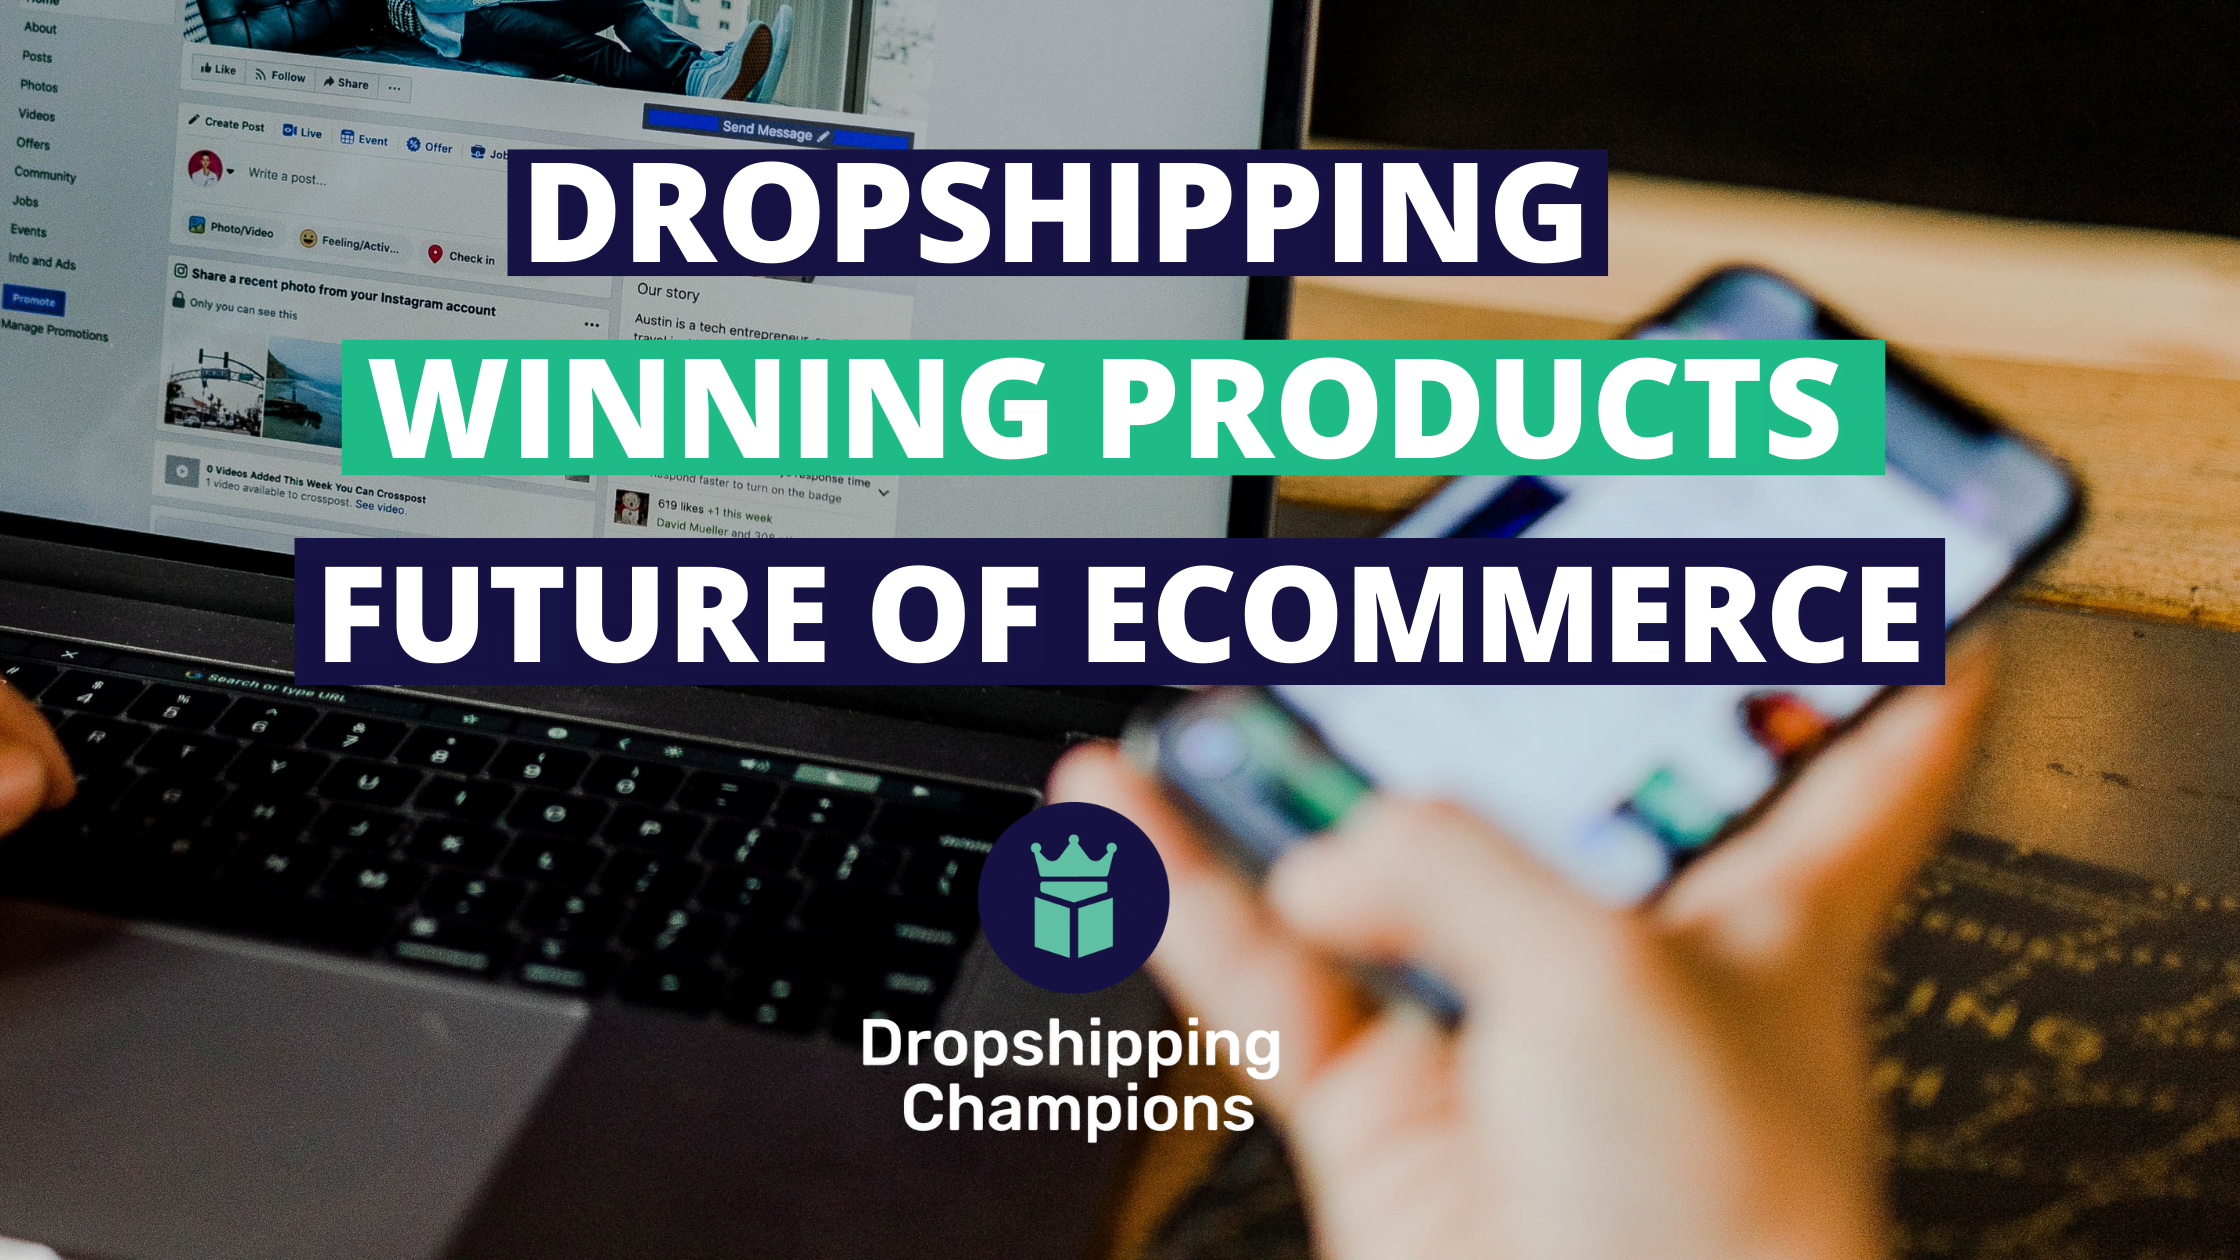 Dropshipping Winning Products & The Future of Ecommerce Trends 2022 Report